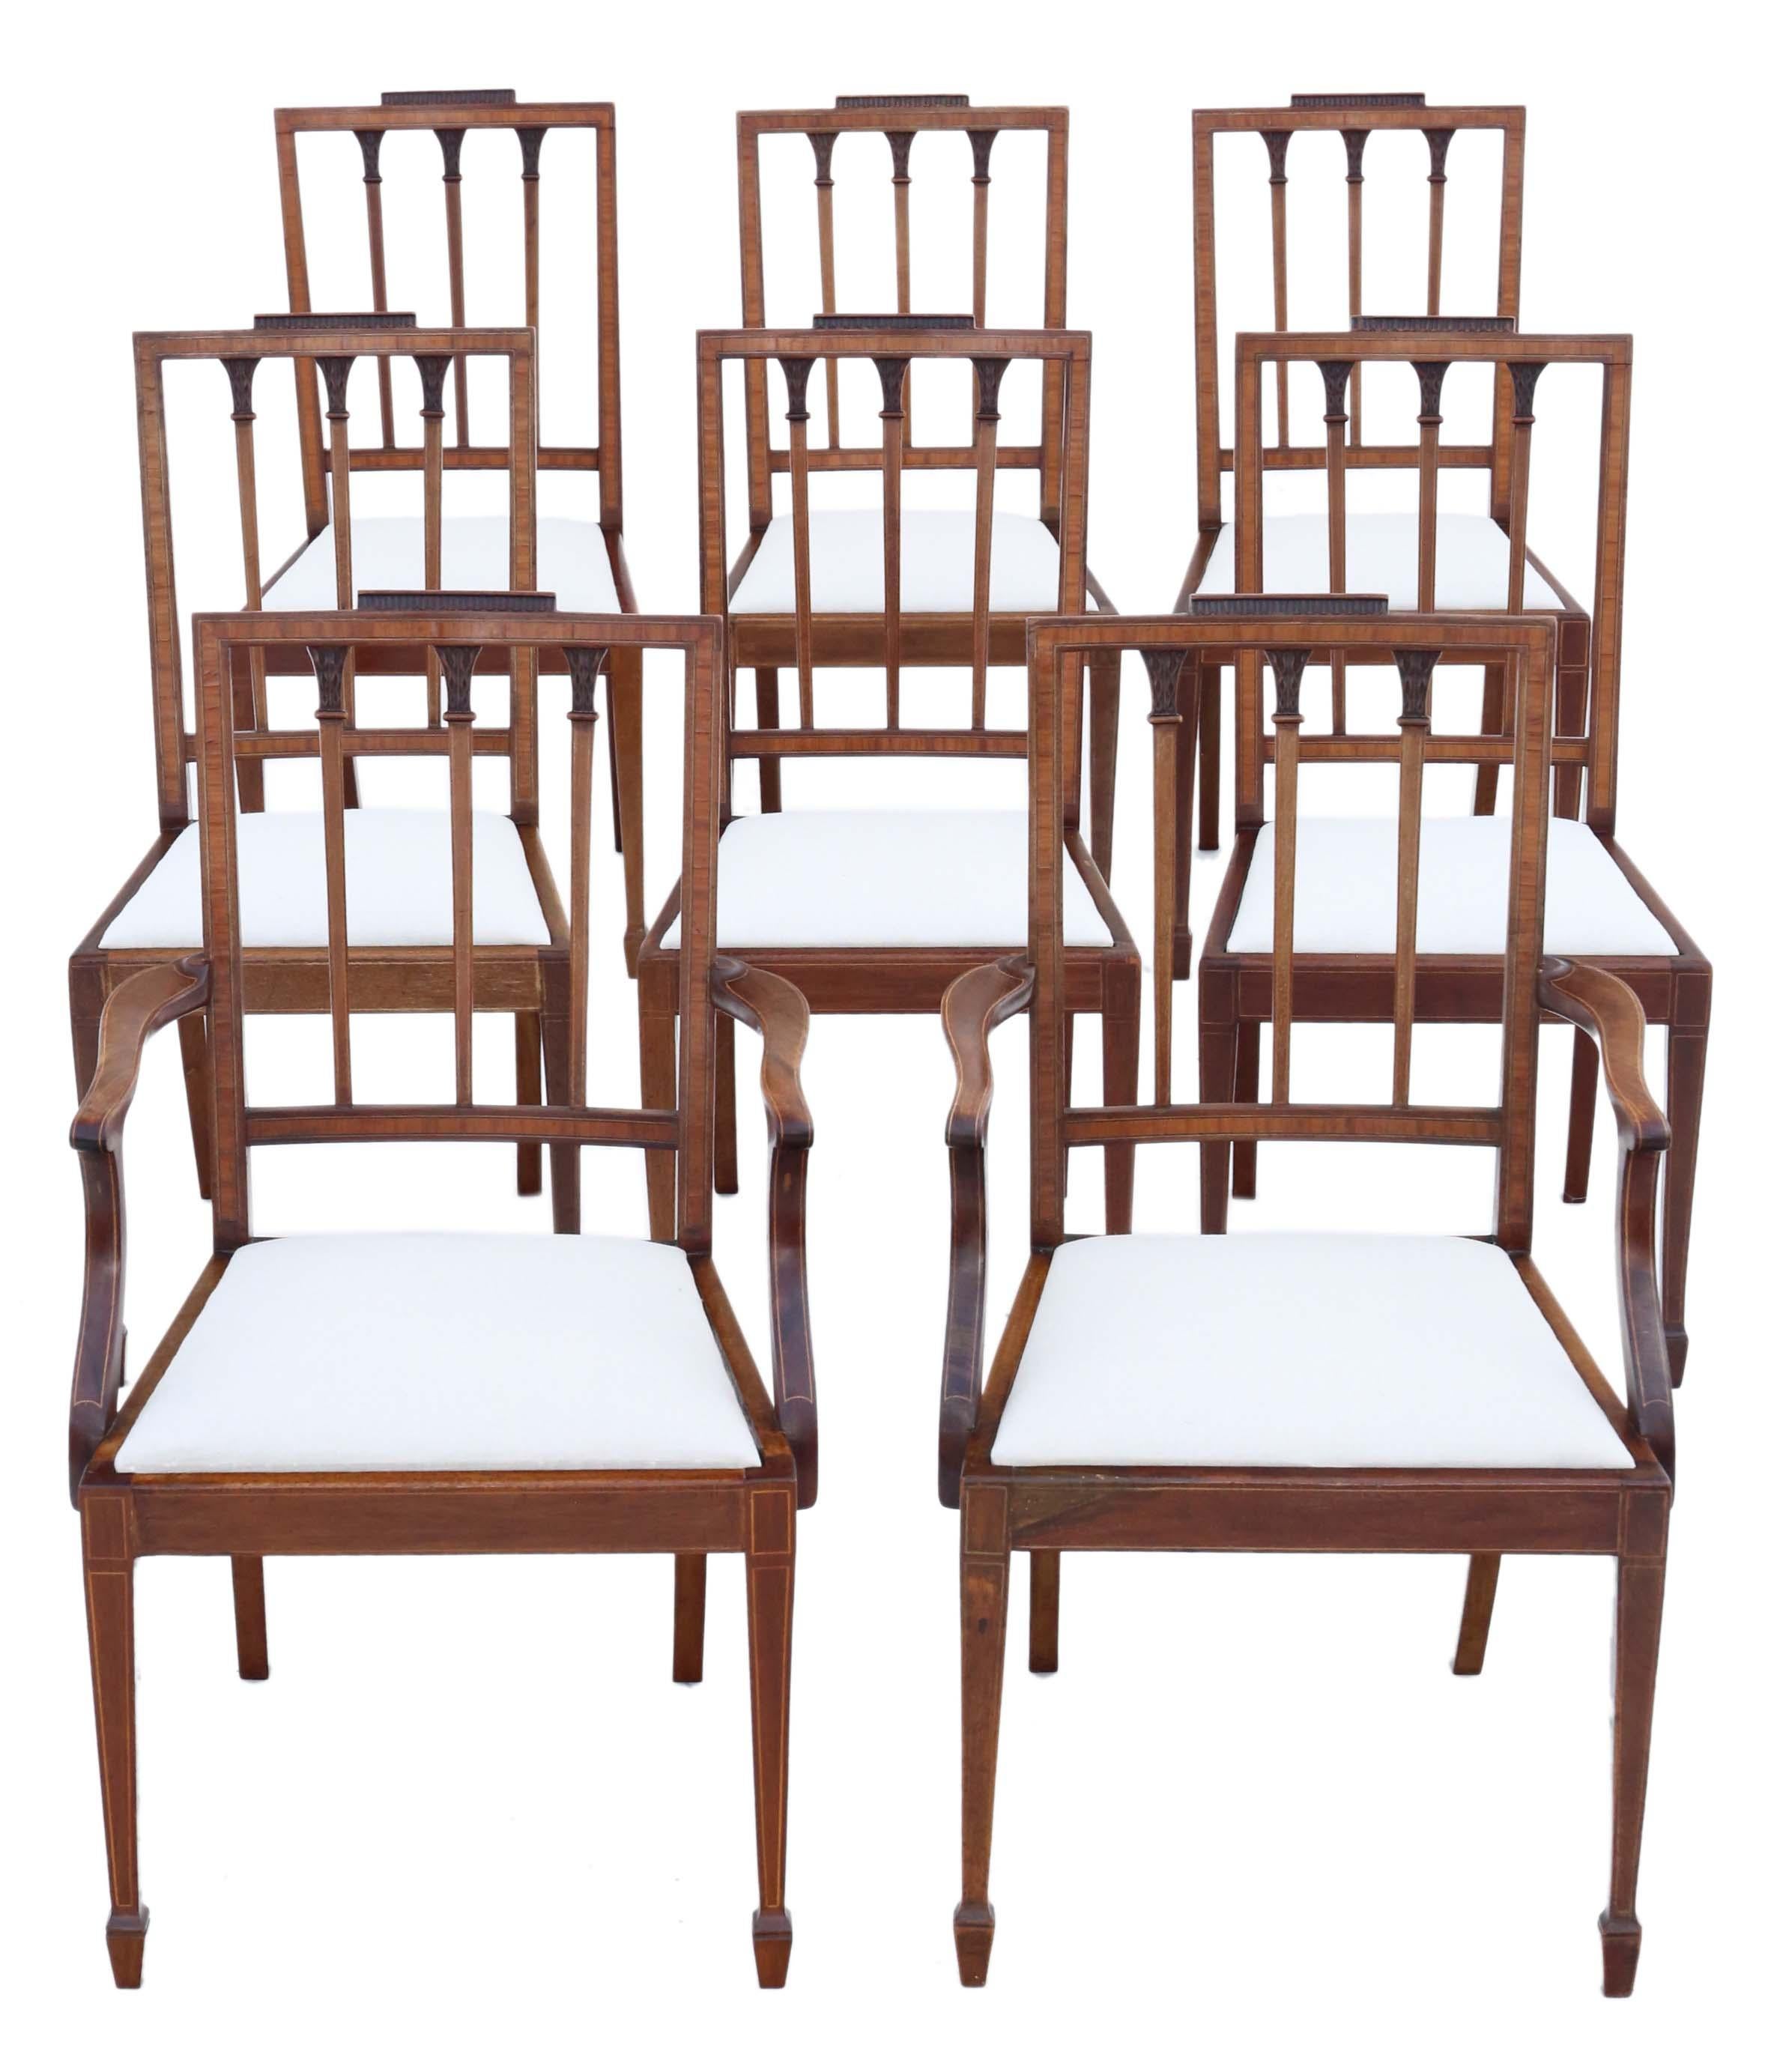 Antique fine quality set of 8 (6 + 2) Georgian revival mahogany dining chairs C1900.

No loose joints or woodworm.

New professional upholstery. Very attractive crossbanding and line inlays.

Overall maximum dimensions:

Carver 56cmW x 58cmD